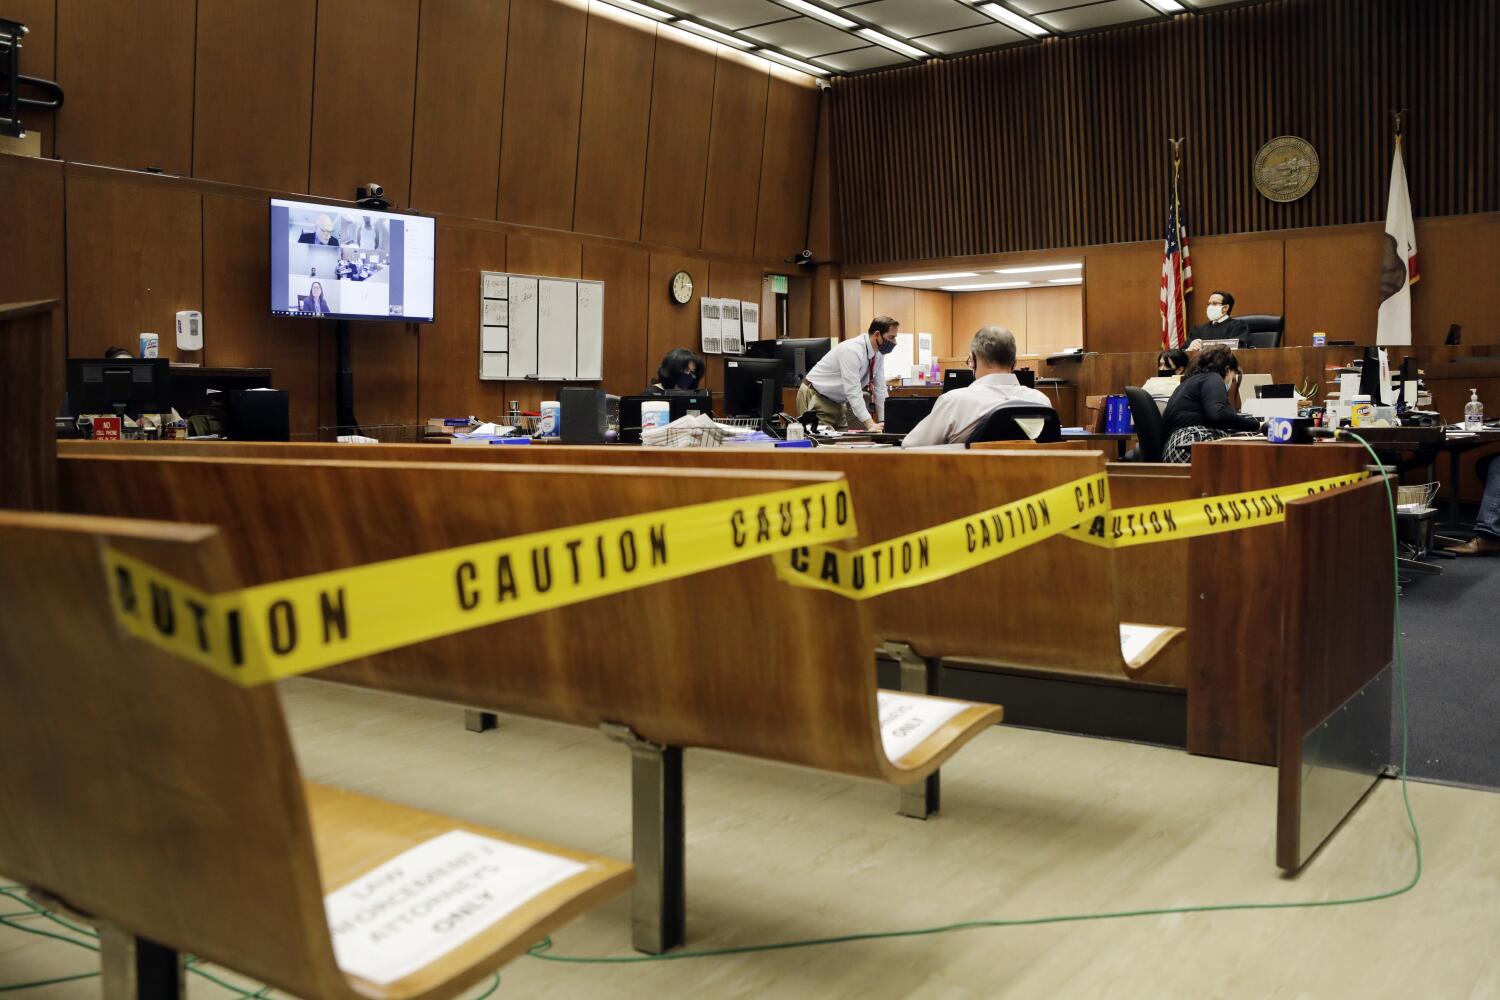 Need a background check in California? Changes at the courts are causing long waits